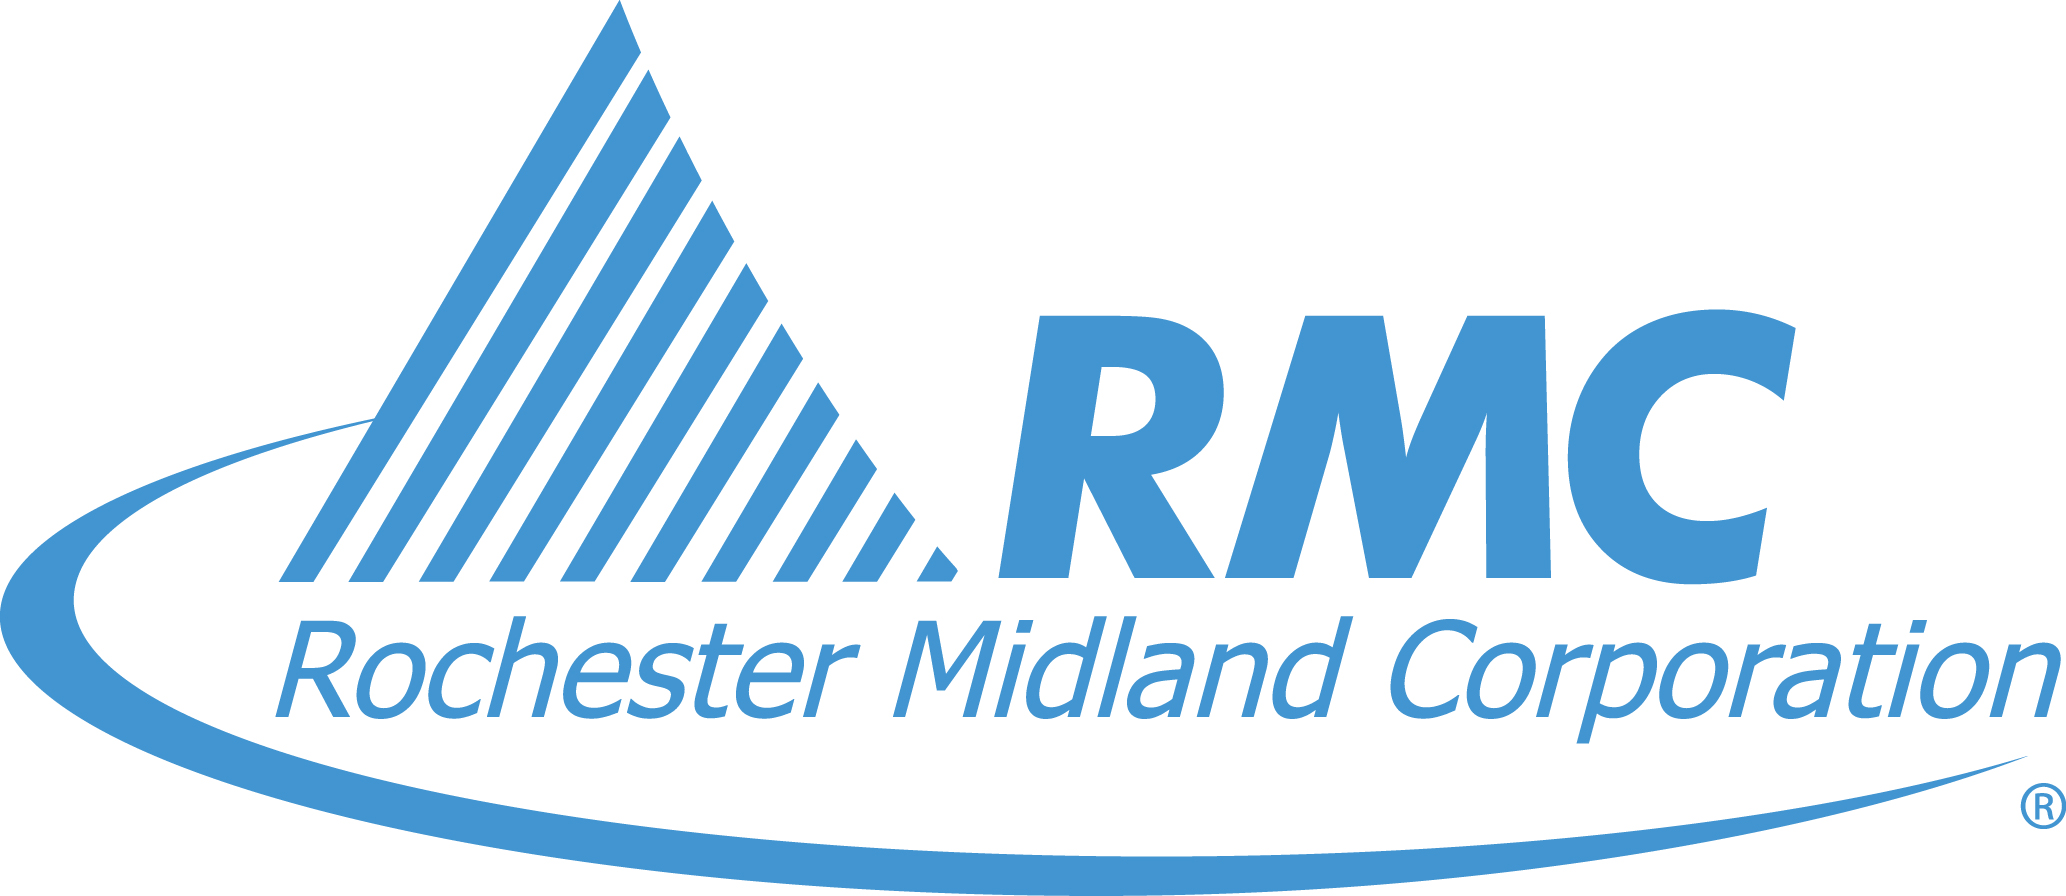 Peak Rock Capital affiliate completes previously announced acquisition of Rochester Midland Corporation